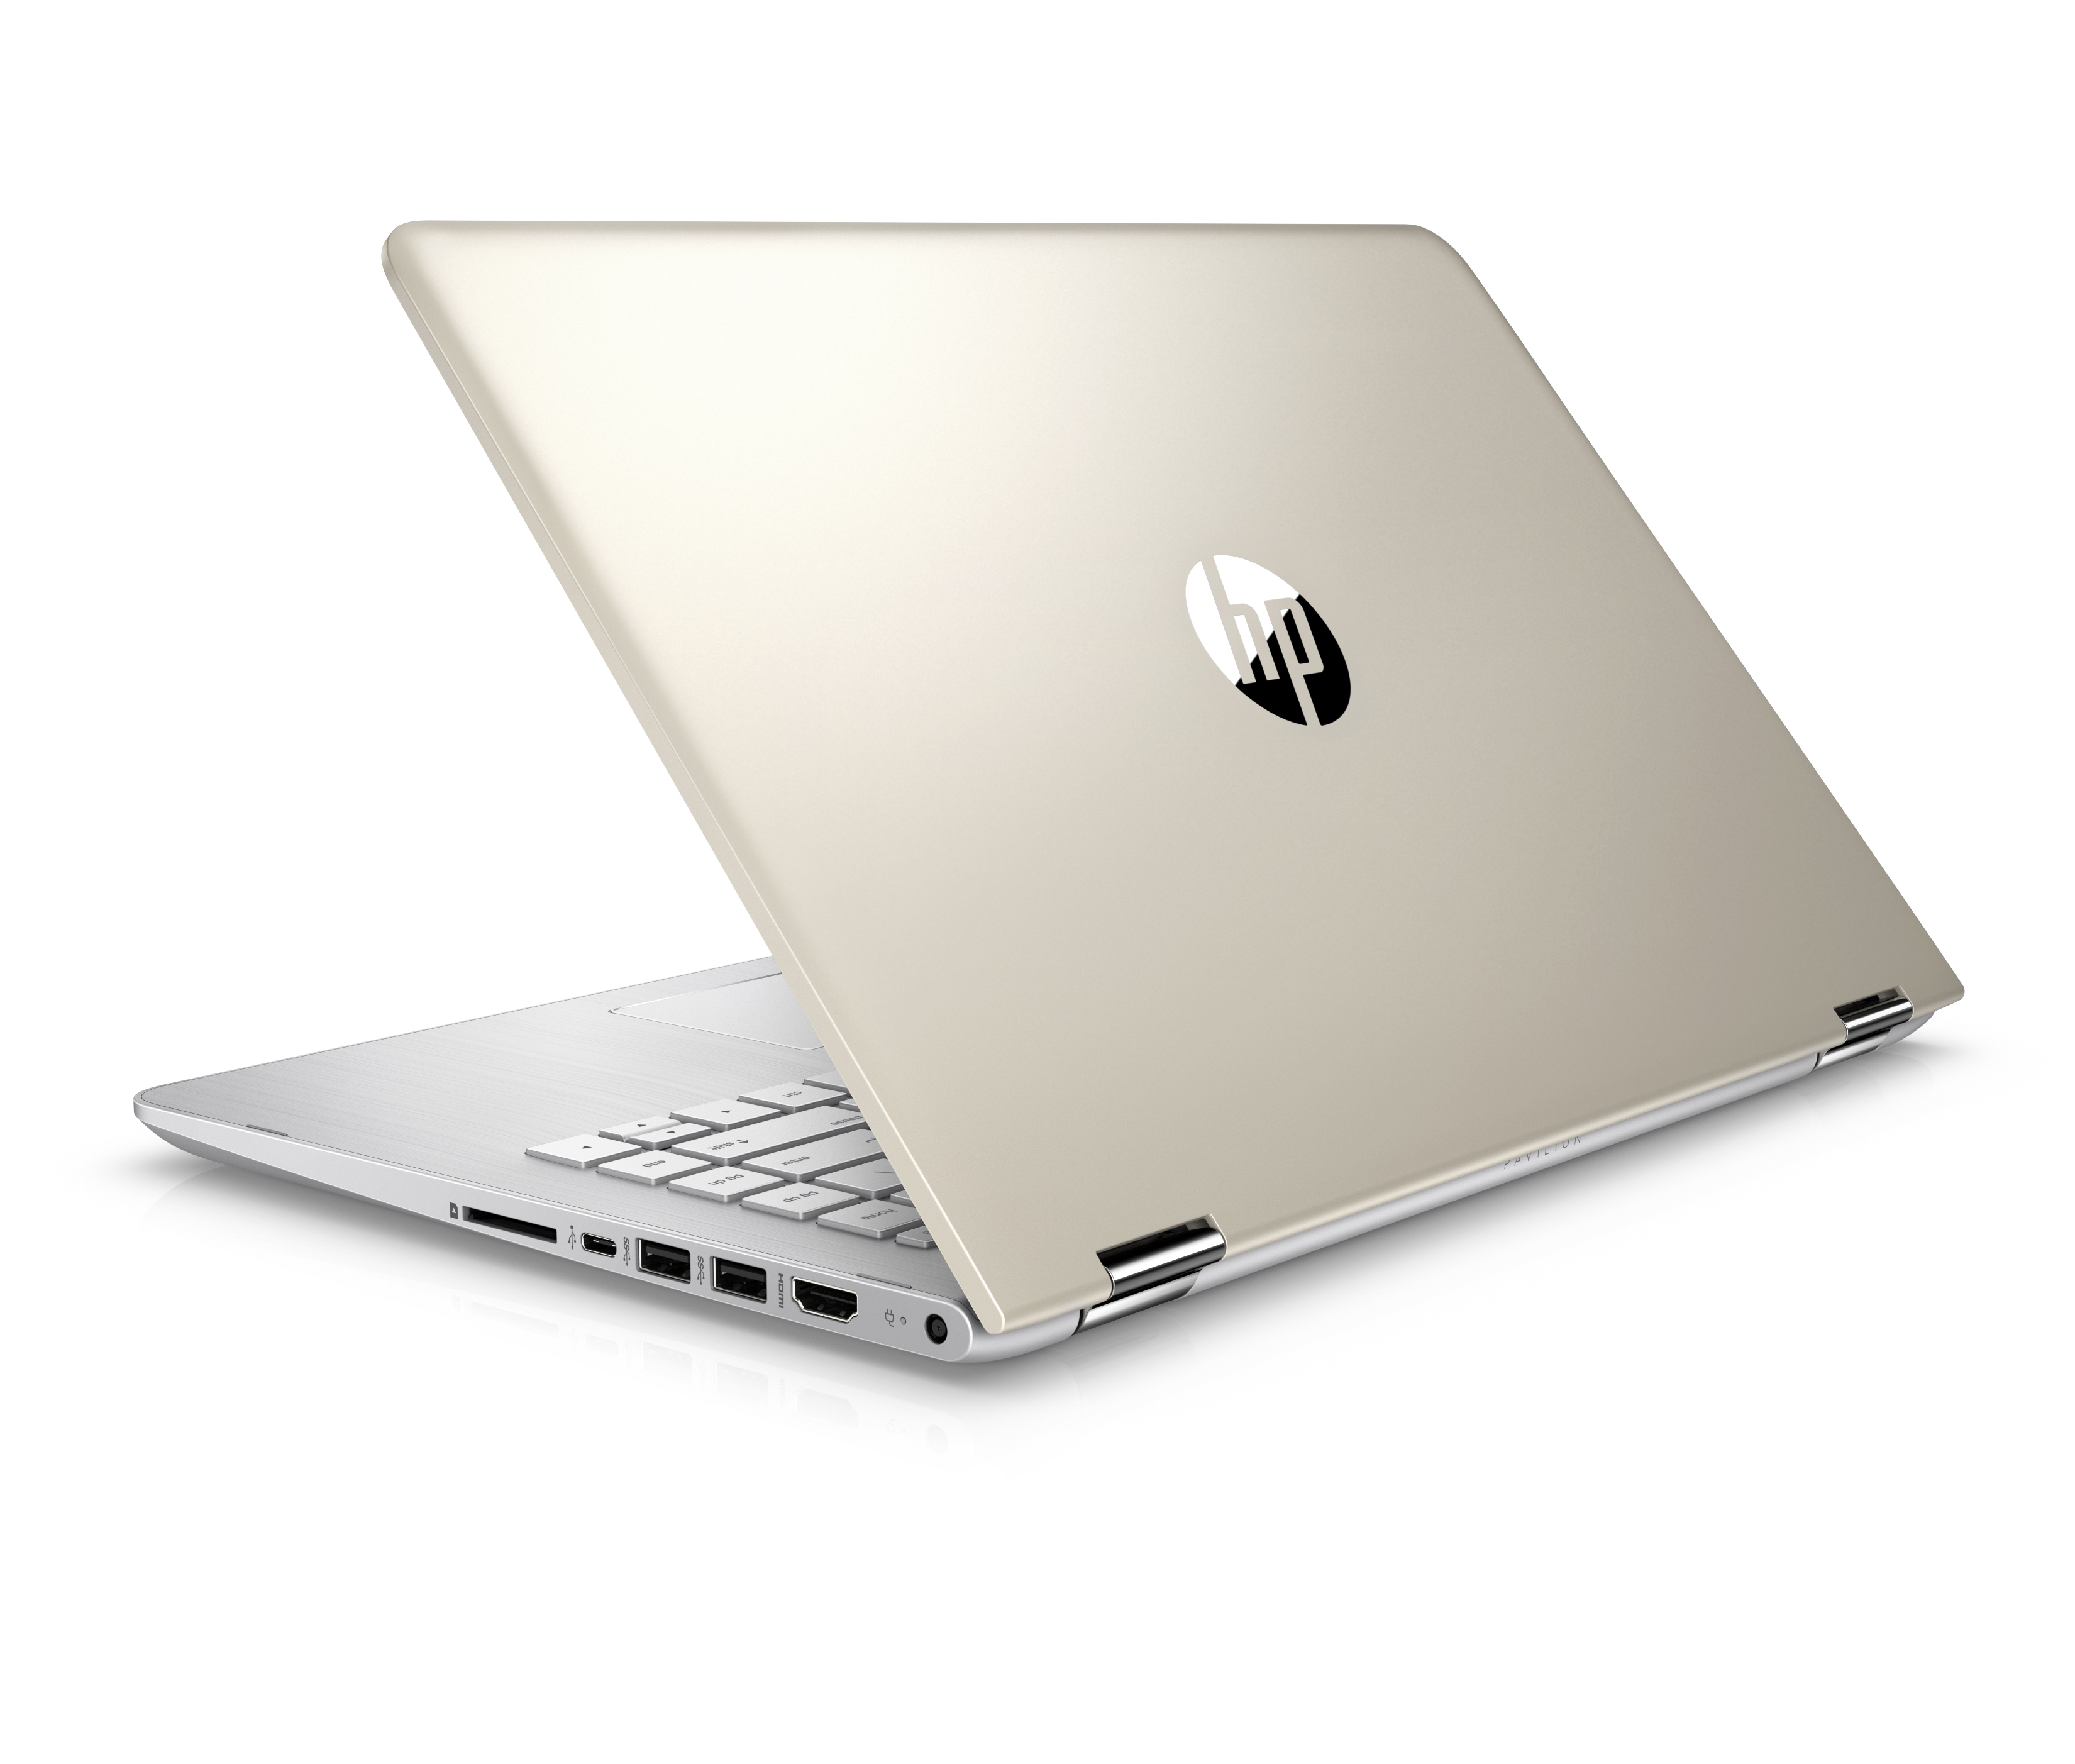 HP's refreshed Pavilion x360 line adds pen support and new Intel